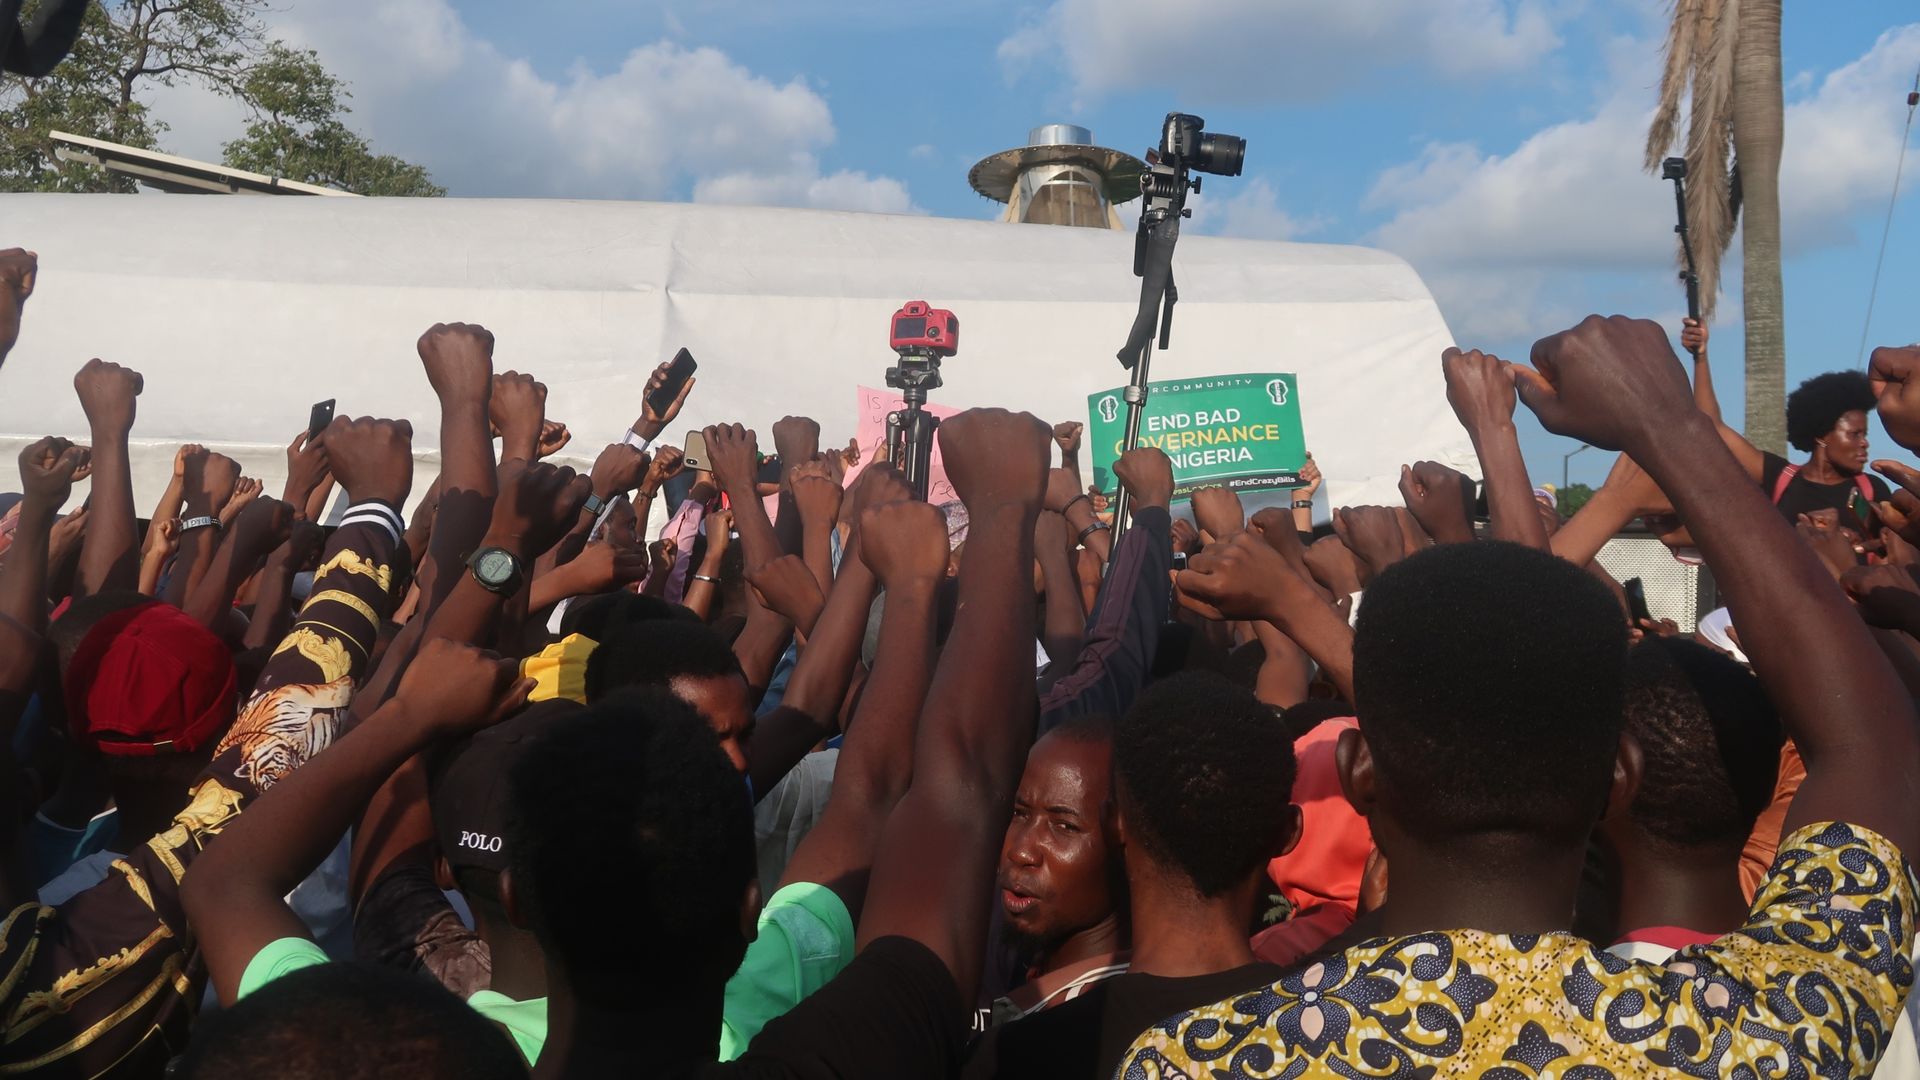 A crowd of Nigerian youths raise their arms against police brutality